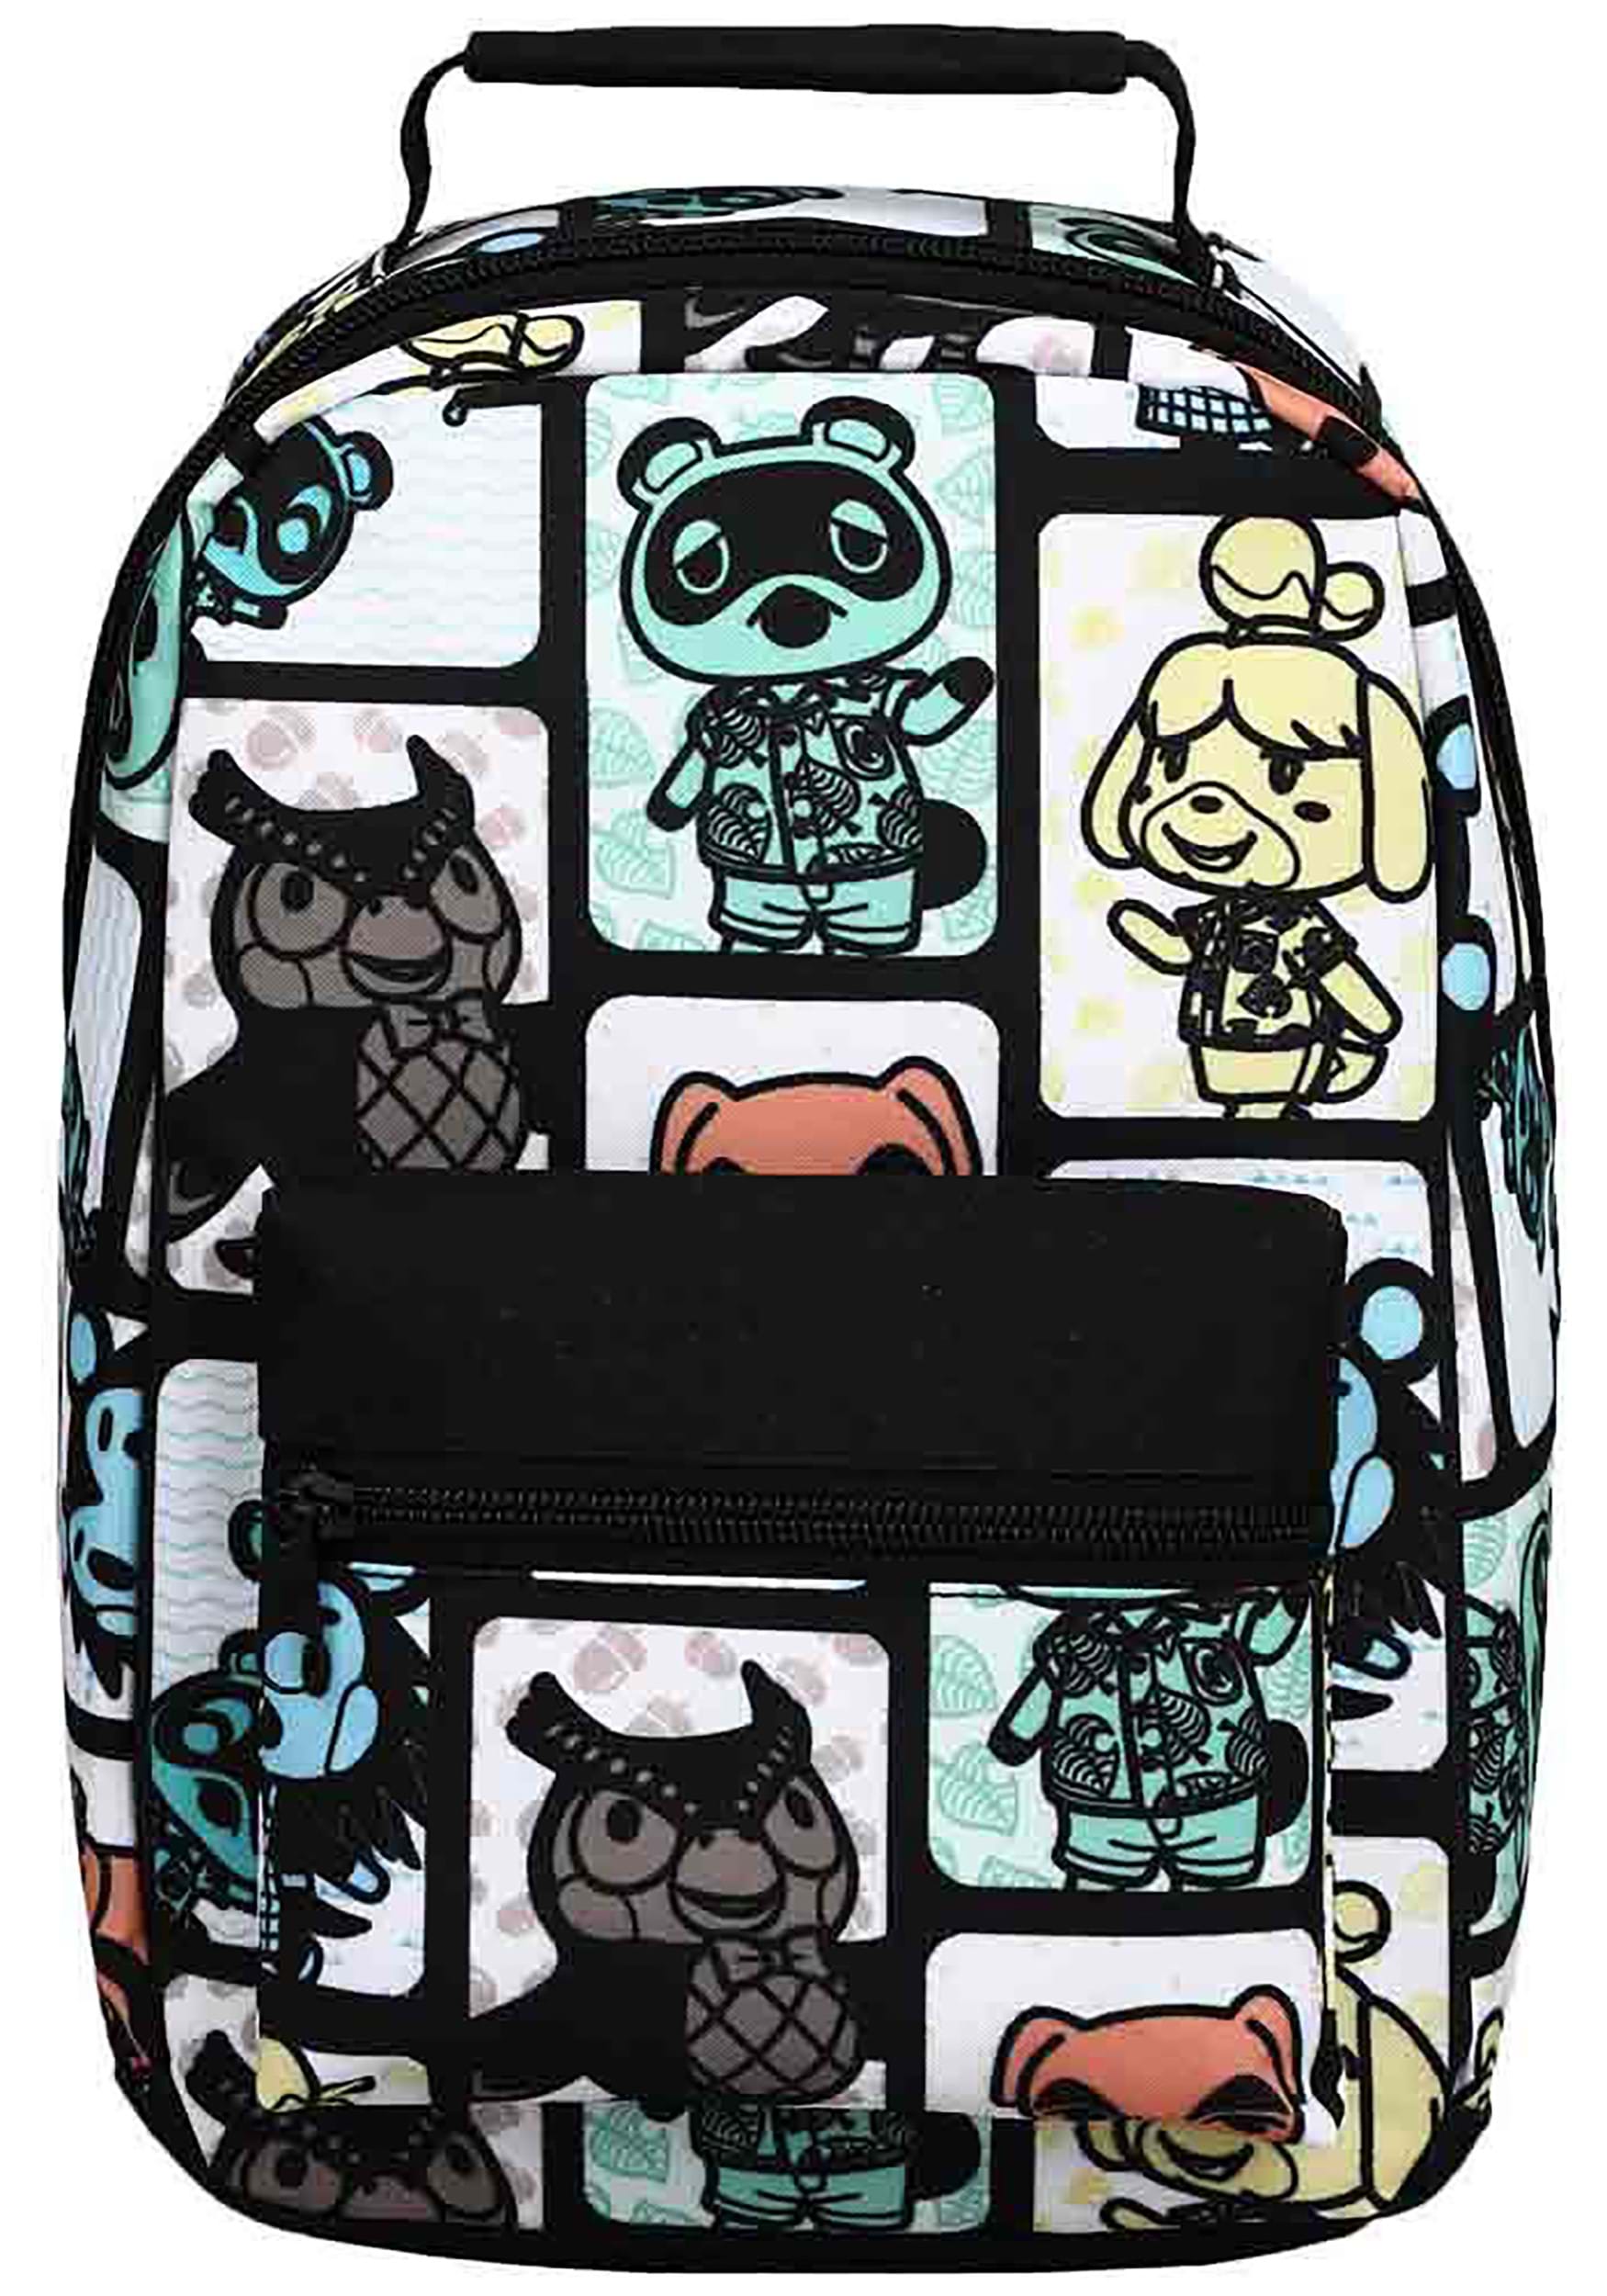 Animal Crossing Character Tile Lunch Bag | Animal Crossing Gifts